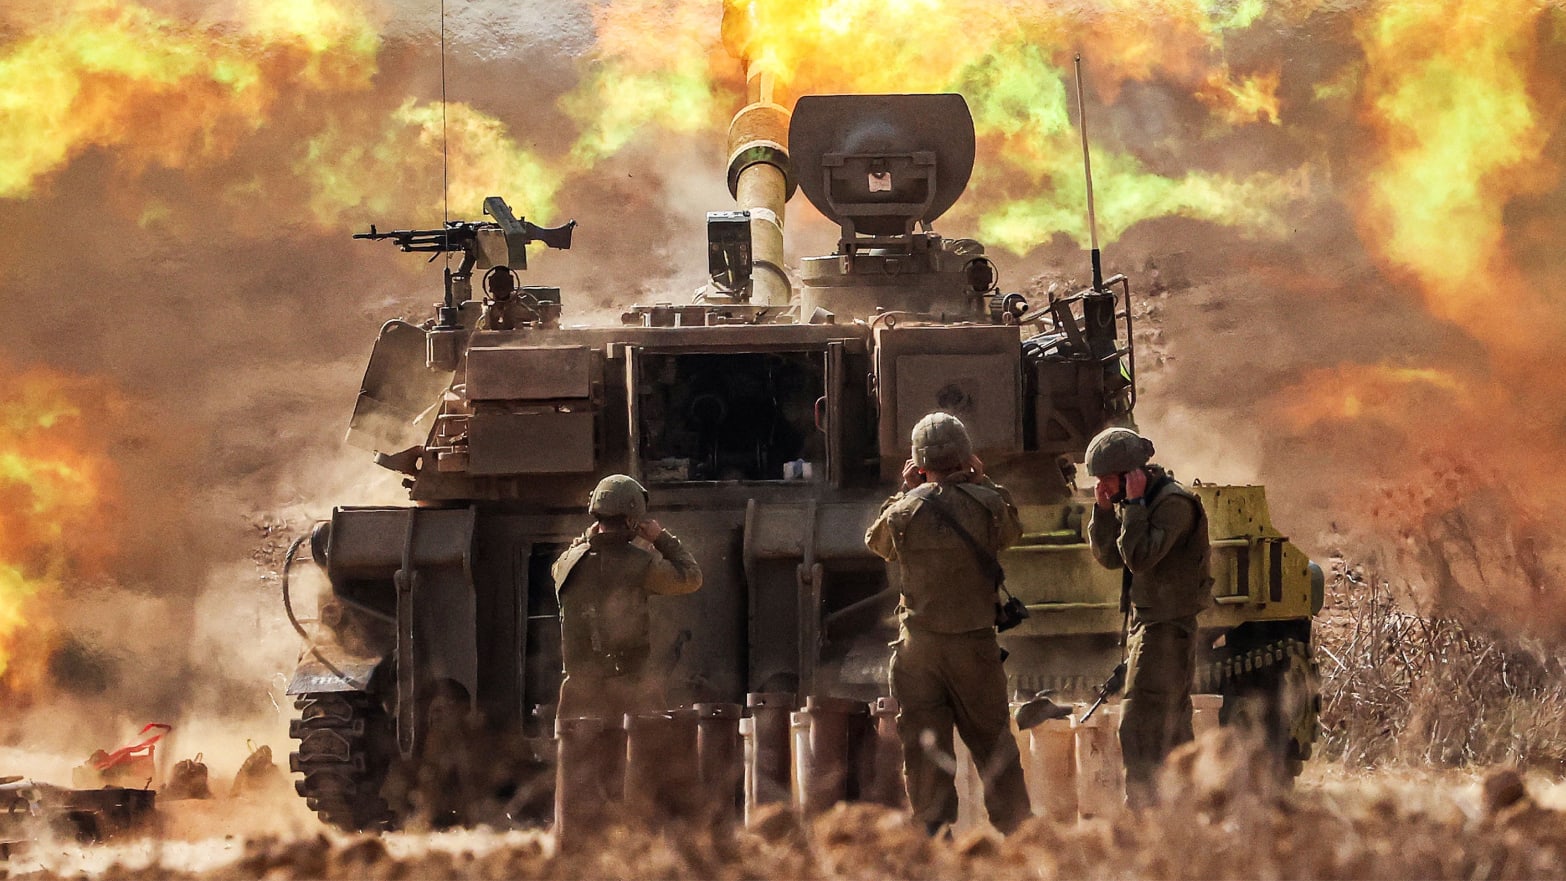 A photo including an Israeli army howitzer